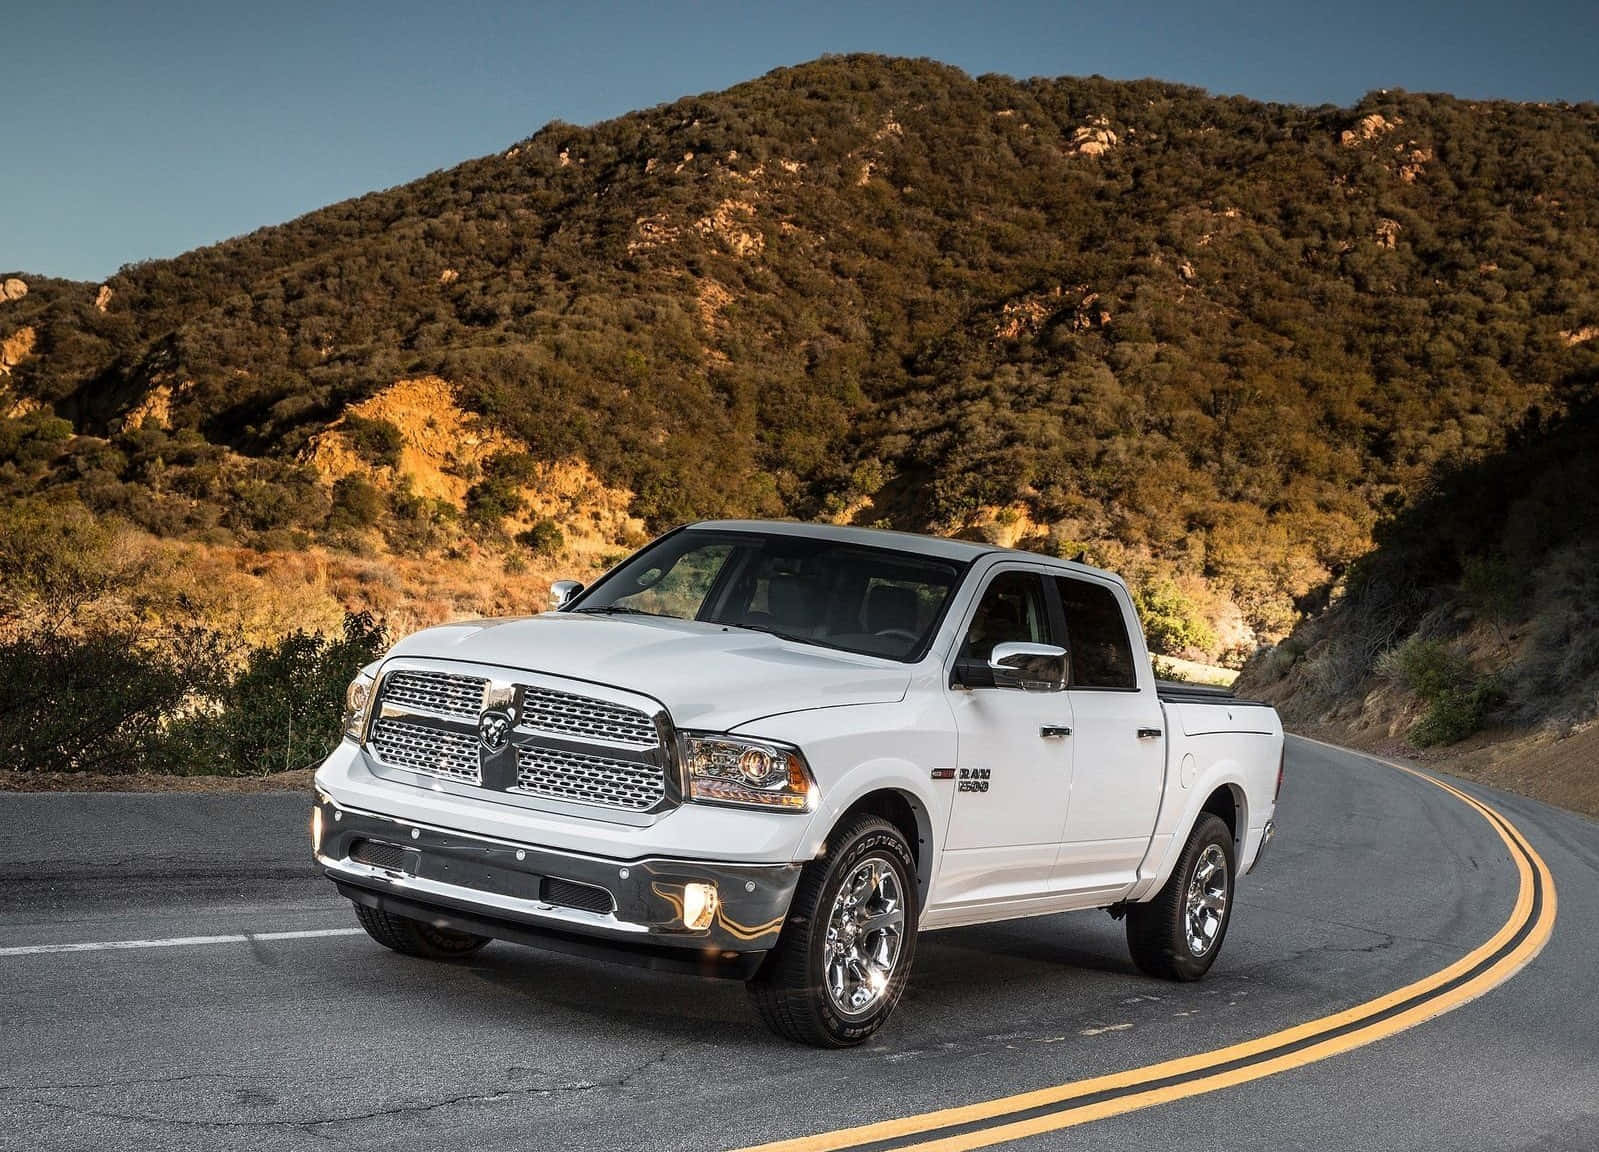 The Dominant Force - Dodge Ram Wallpaper